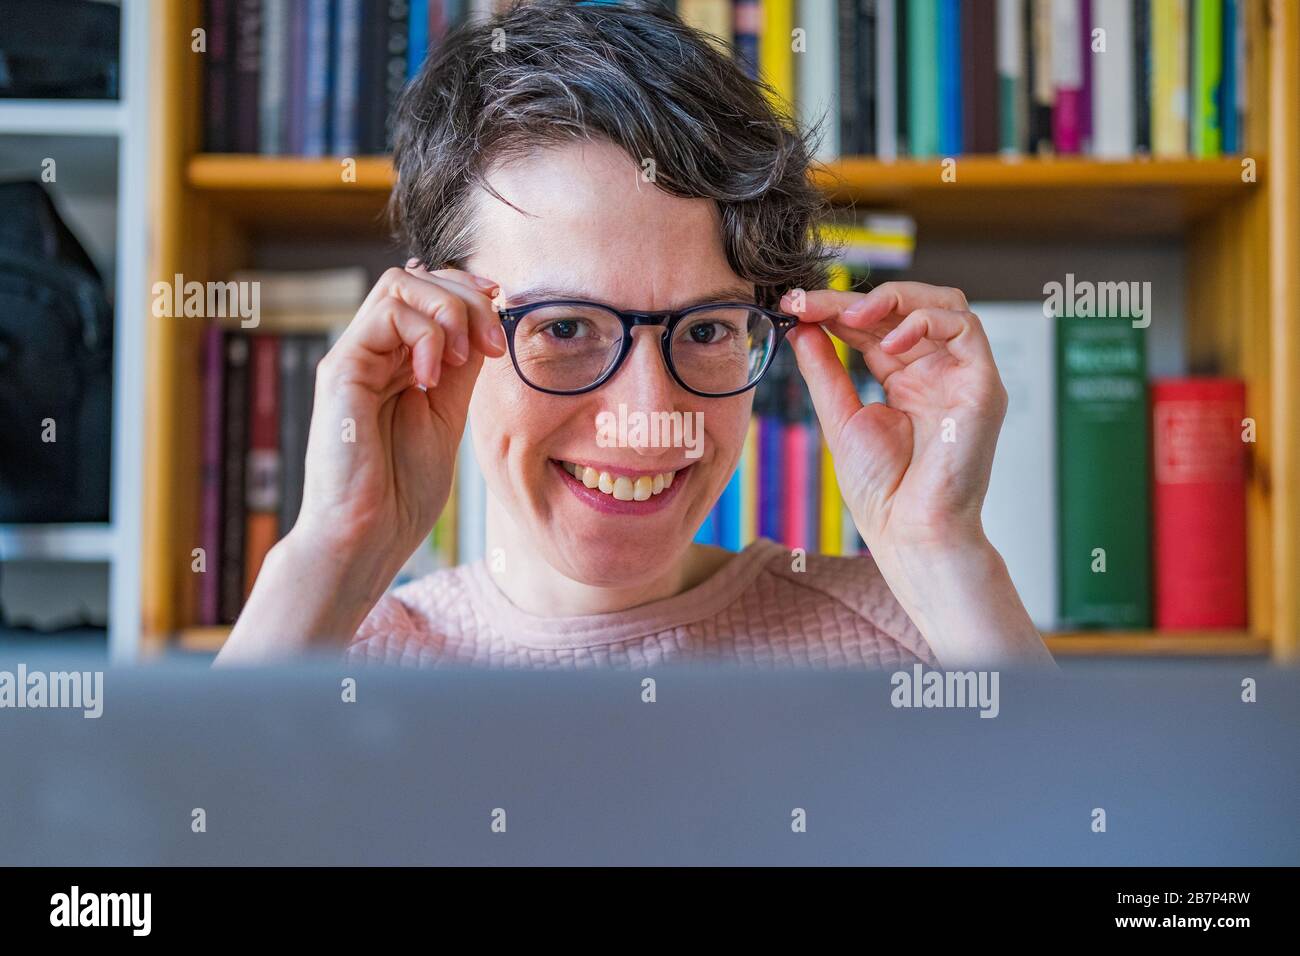 Young woman working from home. Caucasian short hair employee woman with glasses working online from home on computer laptop Stock Photo